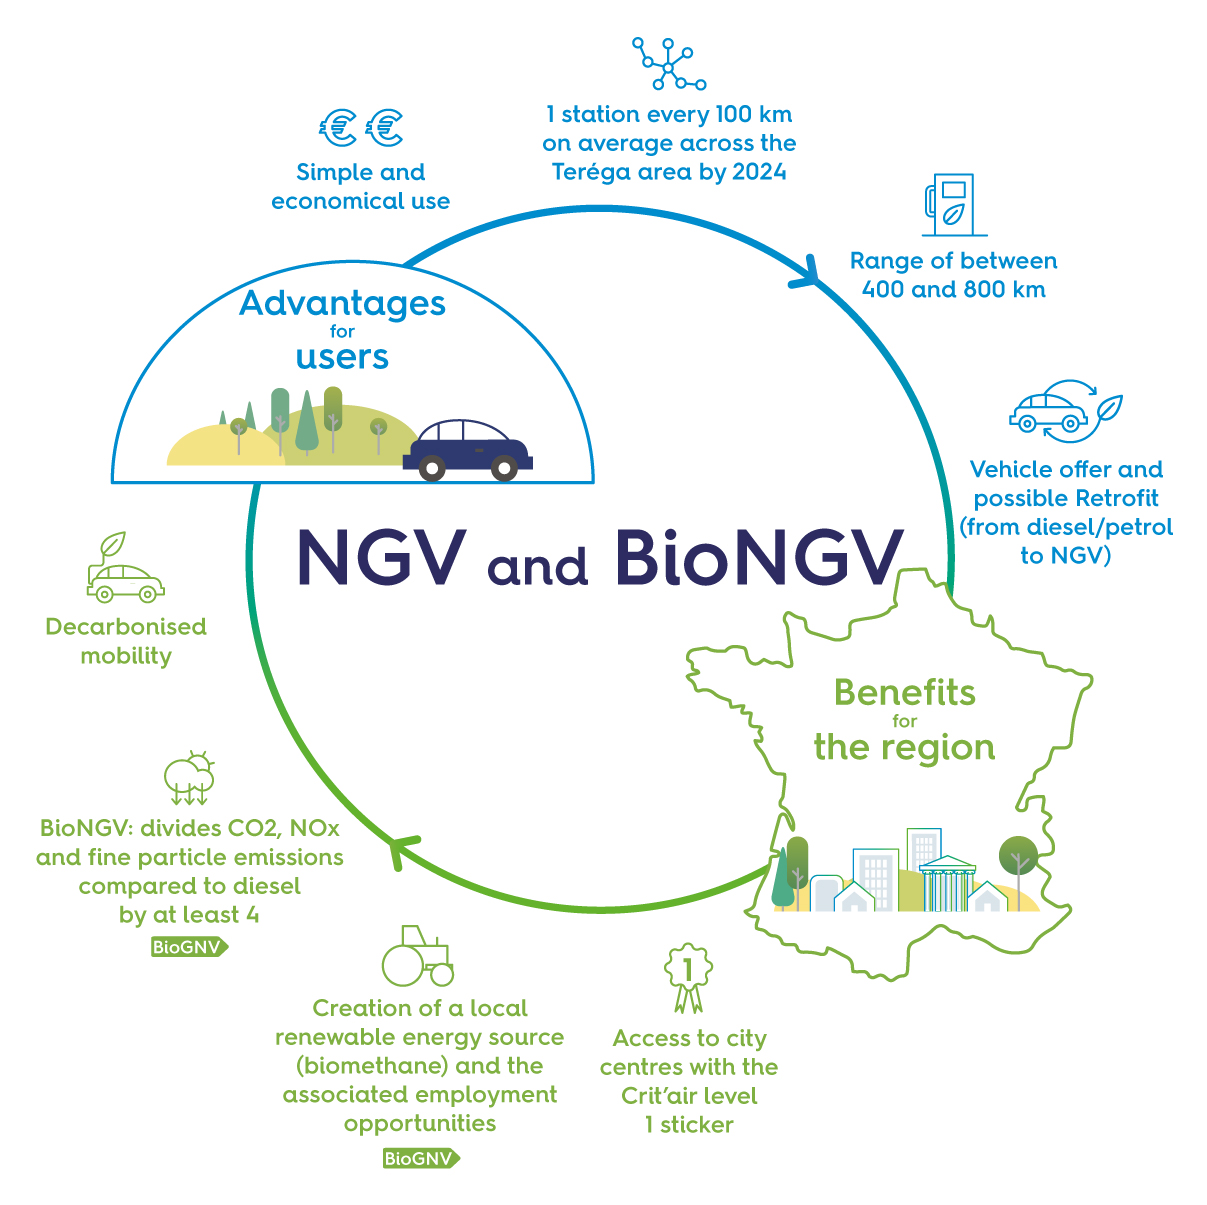 The advantages of NGV and bioNGV